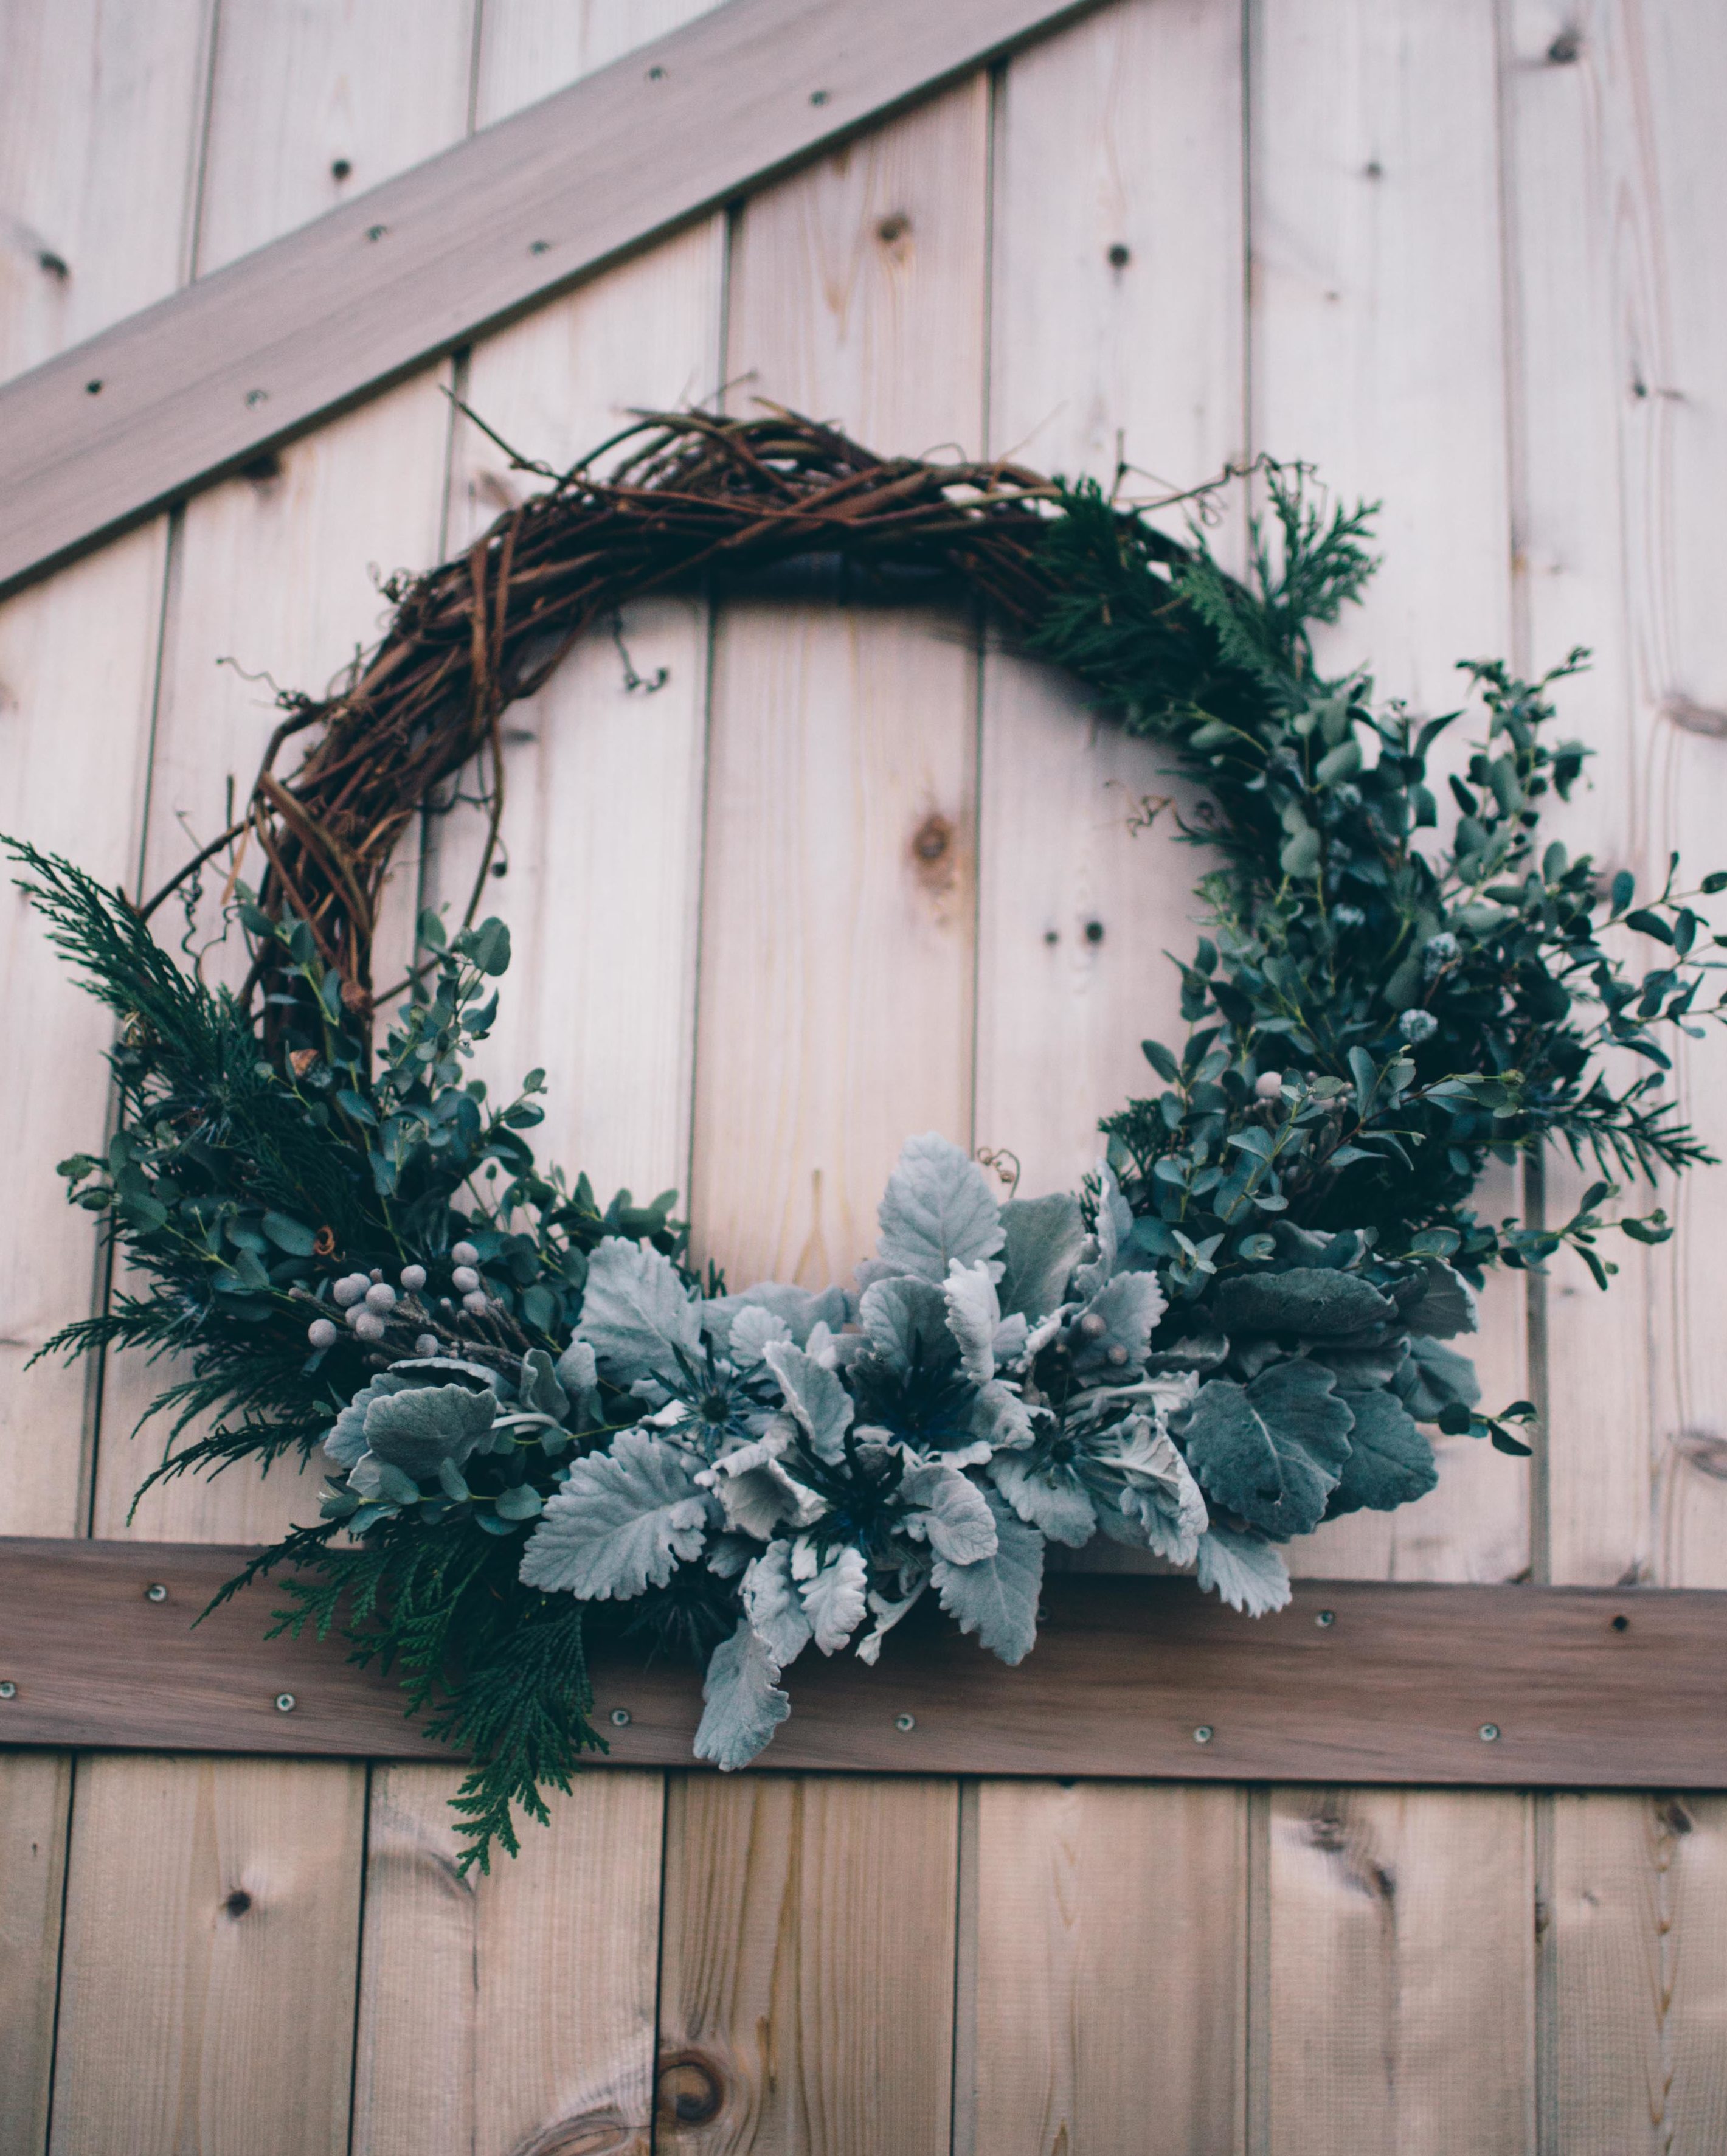 Jess Ann Kirby will be attending wreath decorating workshops in Newport and Providence Rhode Island this holiday season